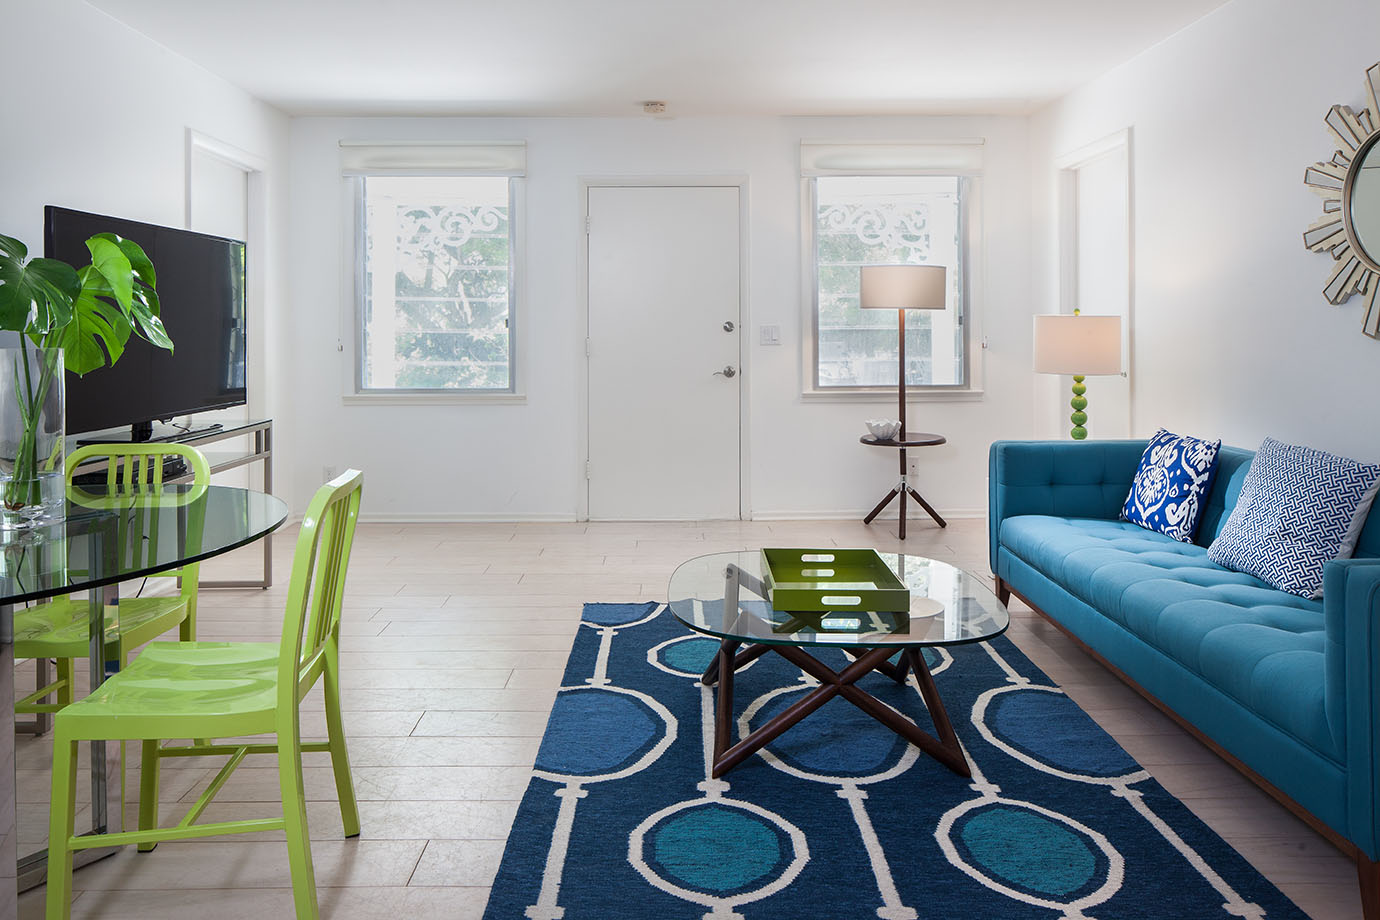 Guest house entrance way, with a blue fabric couch, a nay blue carpet with circular patterns, a coffee table a glass top, a glass table with lime green metal chairs and a tv stand with a large flat screen tv in Captiva Island, FL